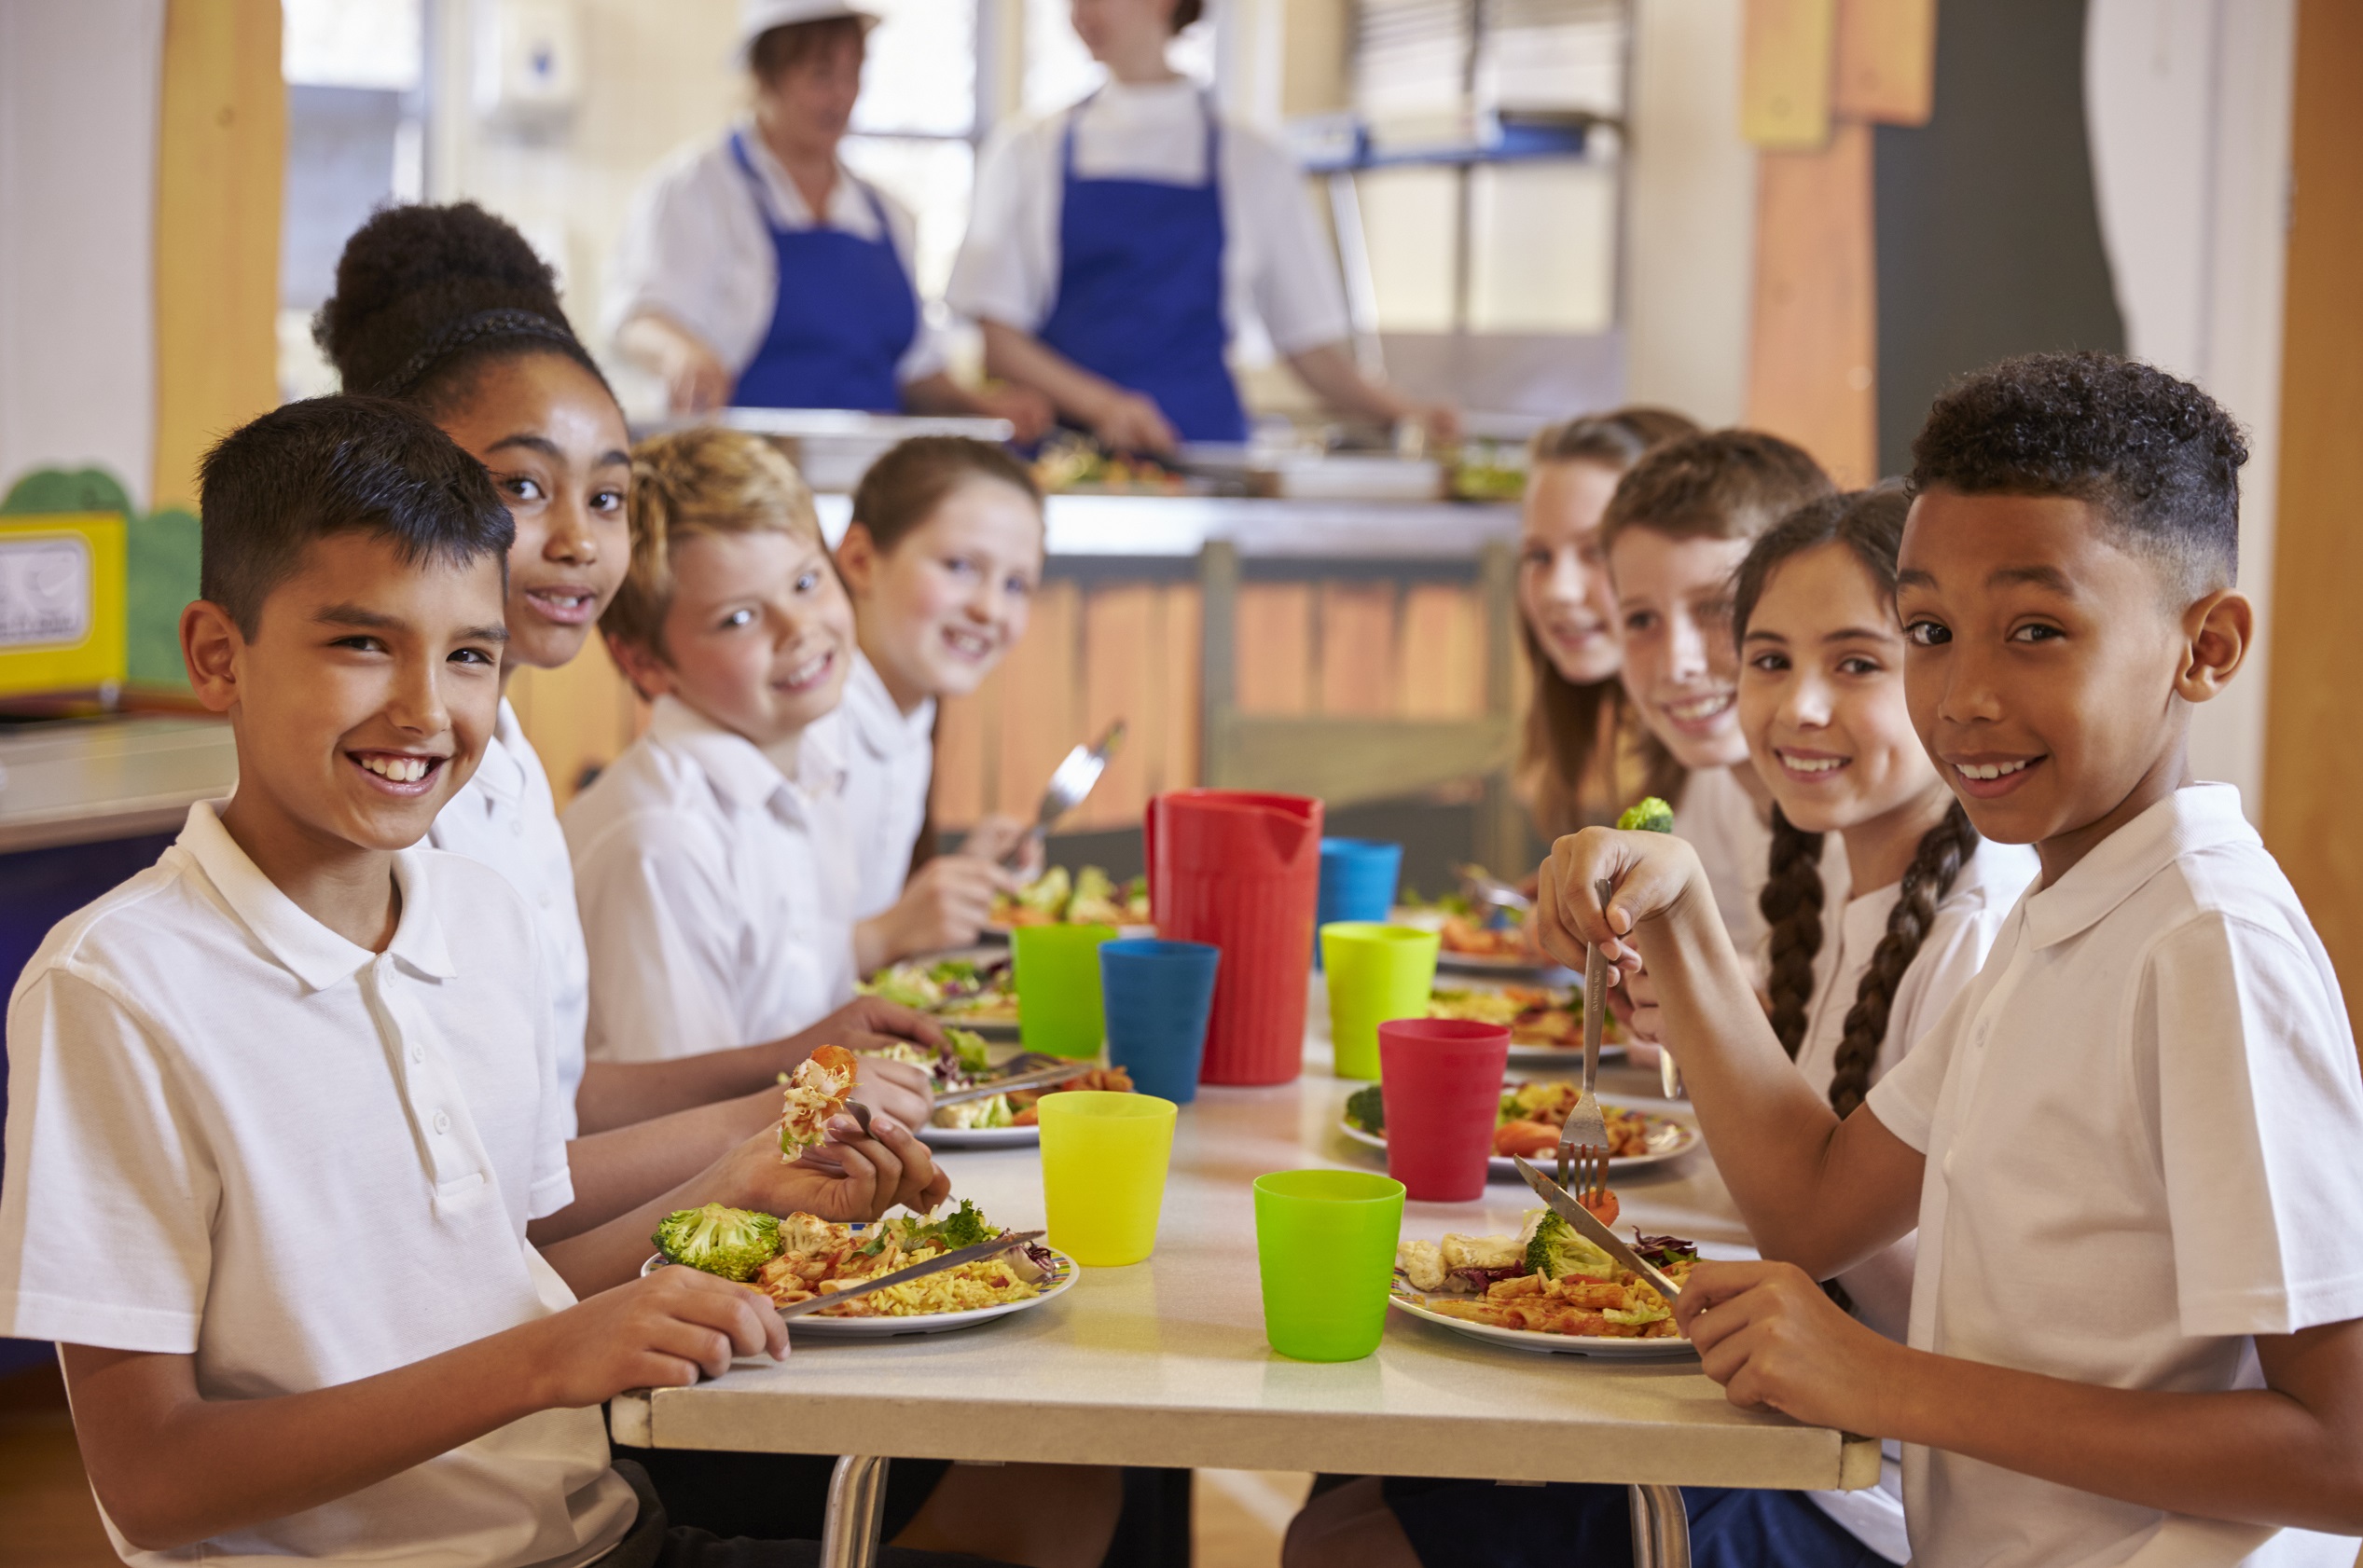 Kids at a table in a primary school cafeteria look to camera